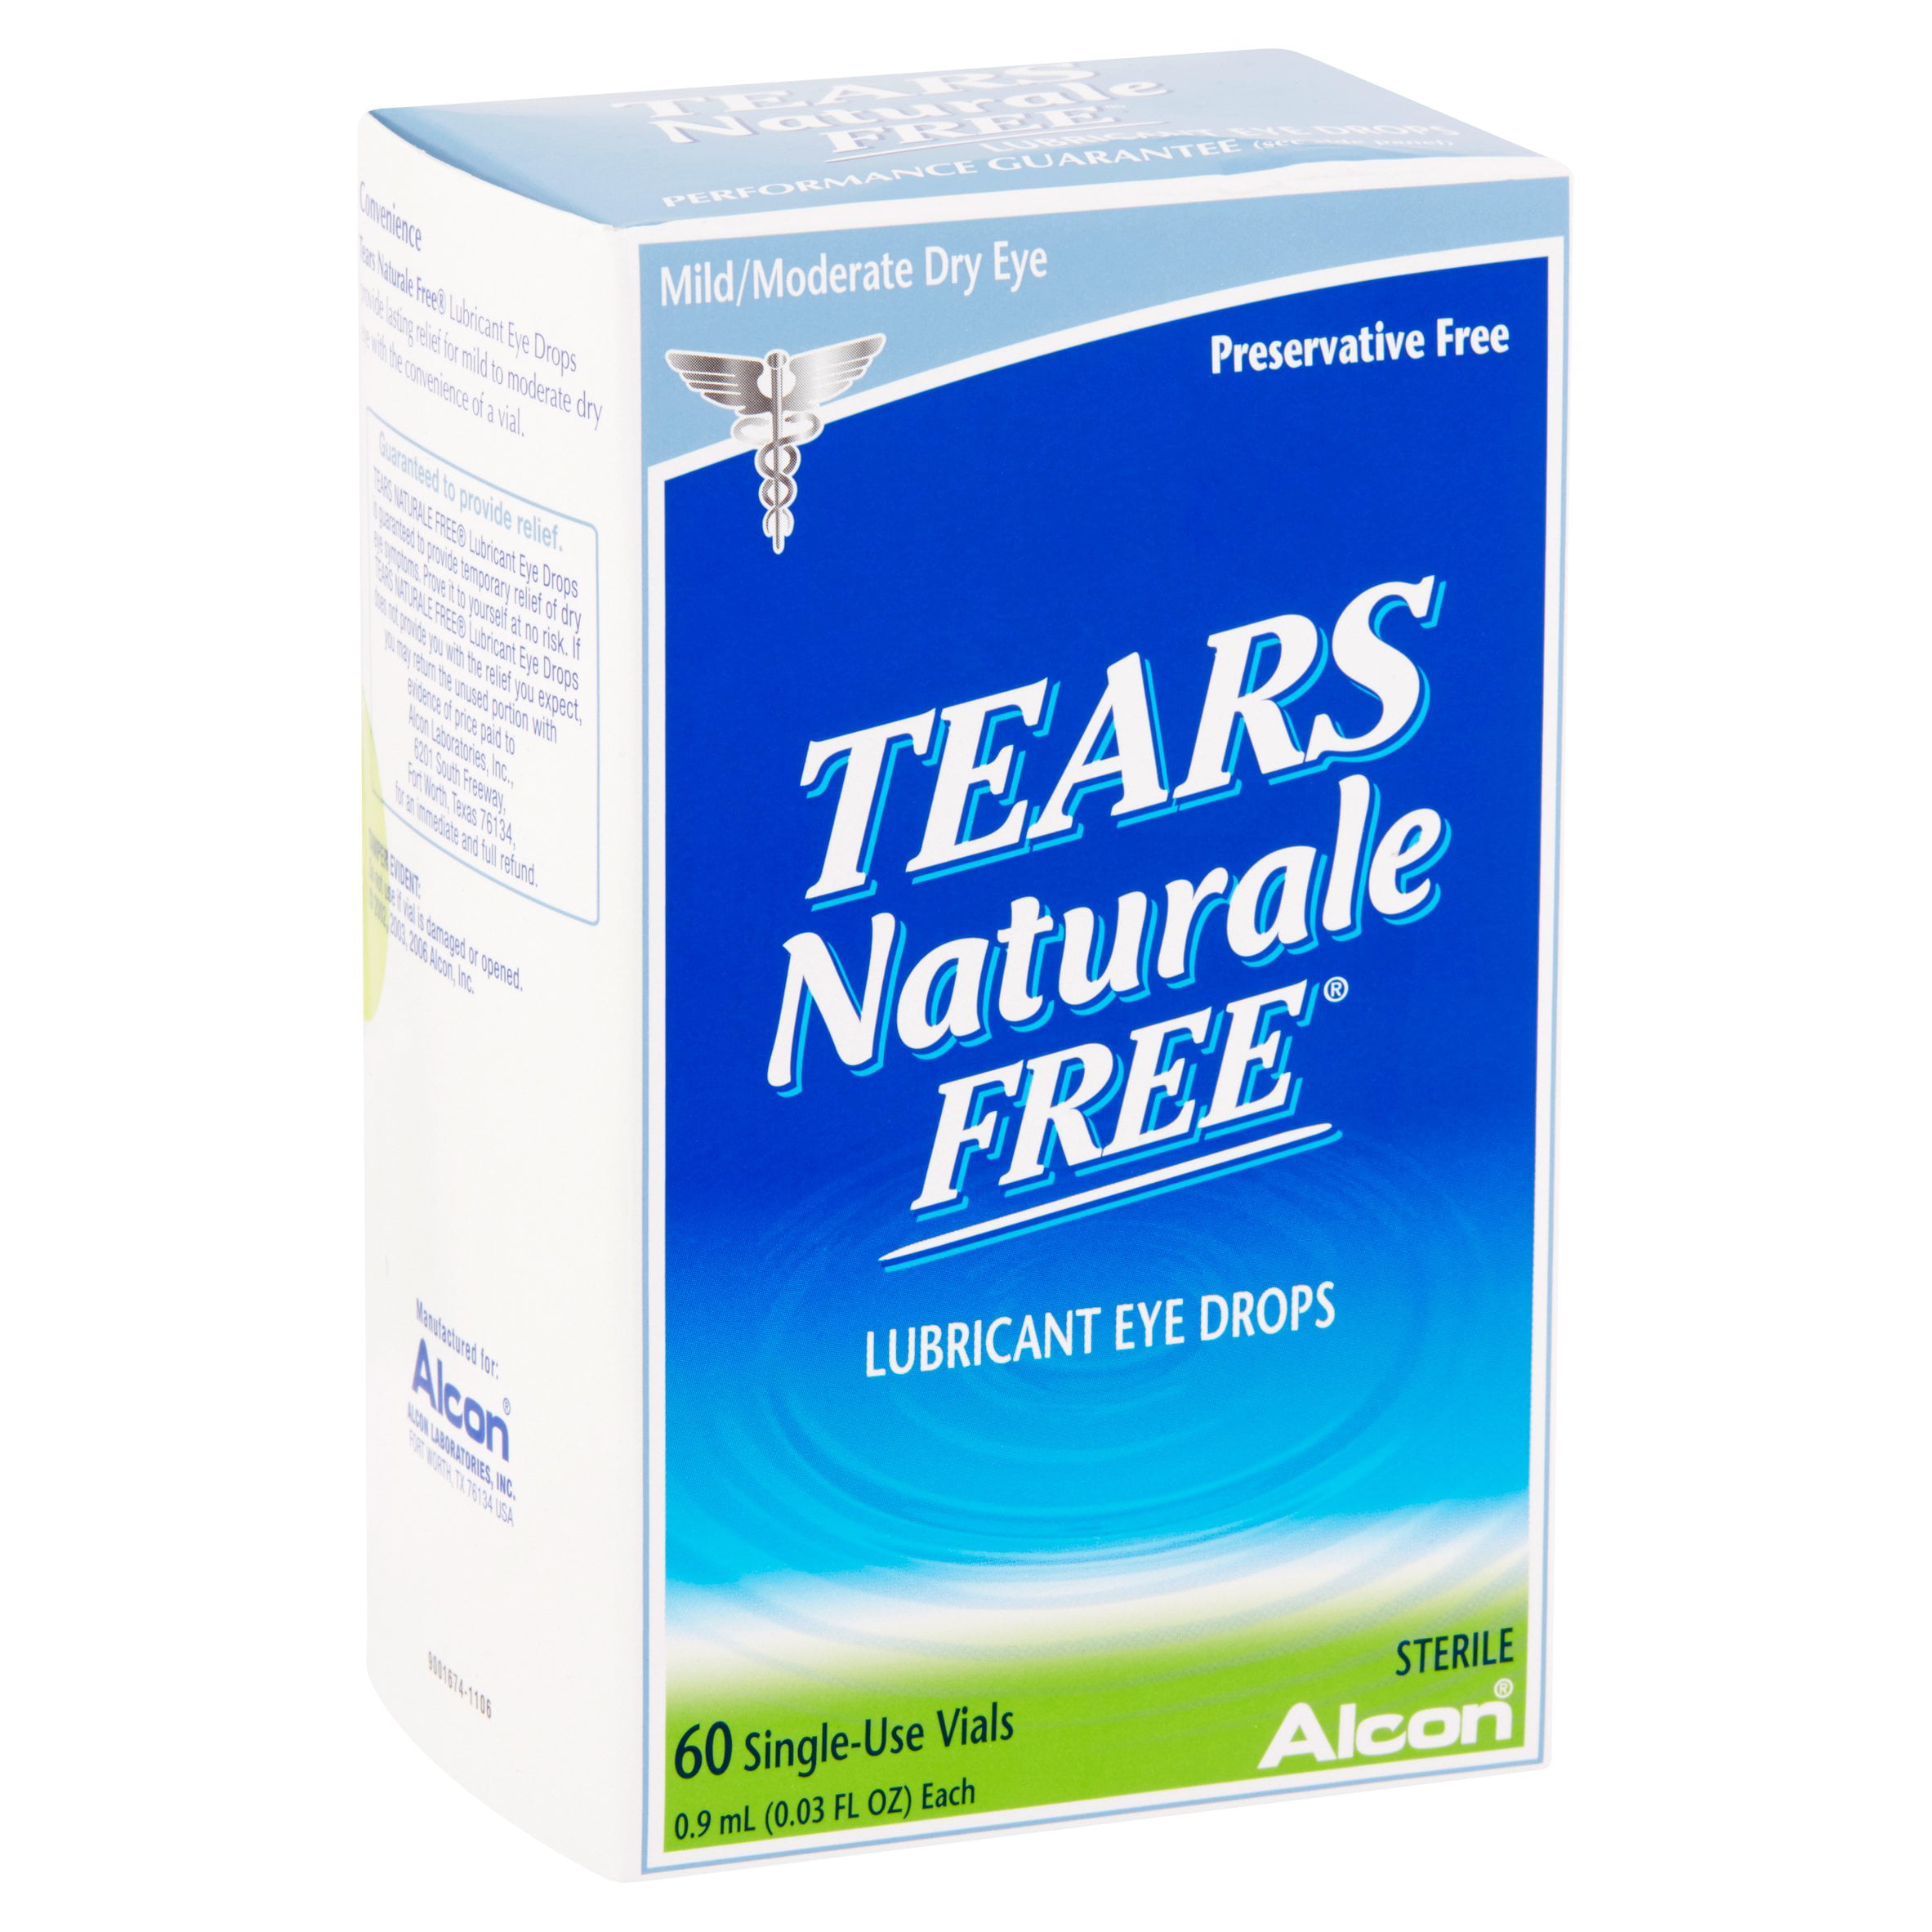 Alcon tears naturale free from walmart humane meaning